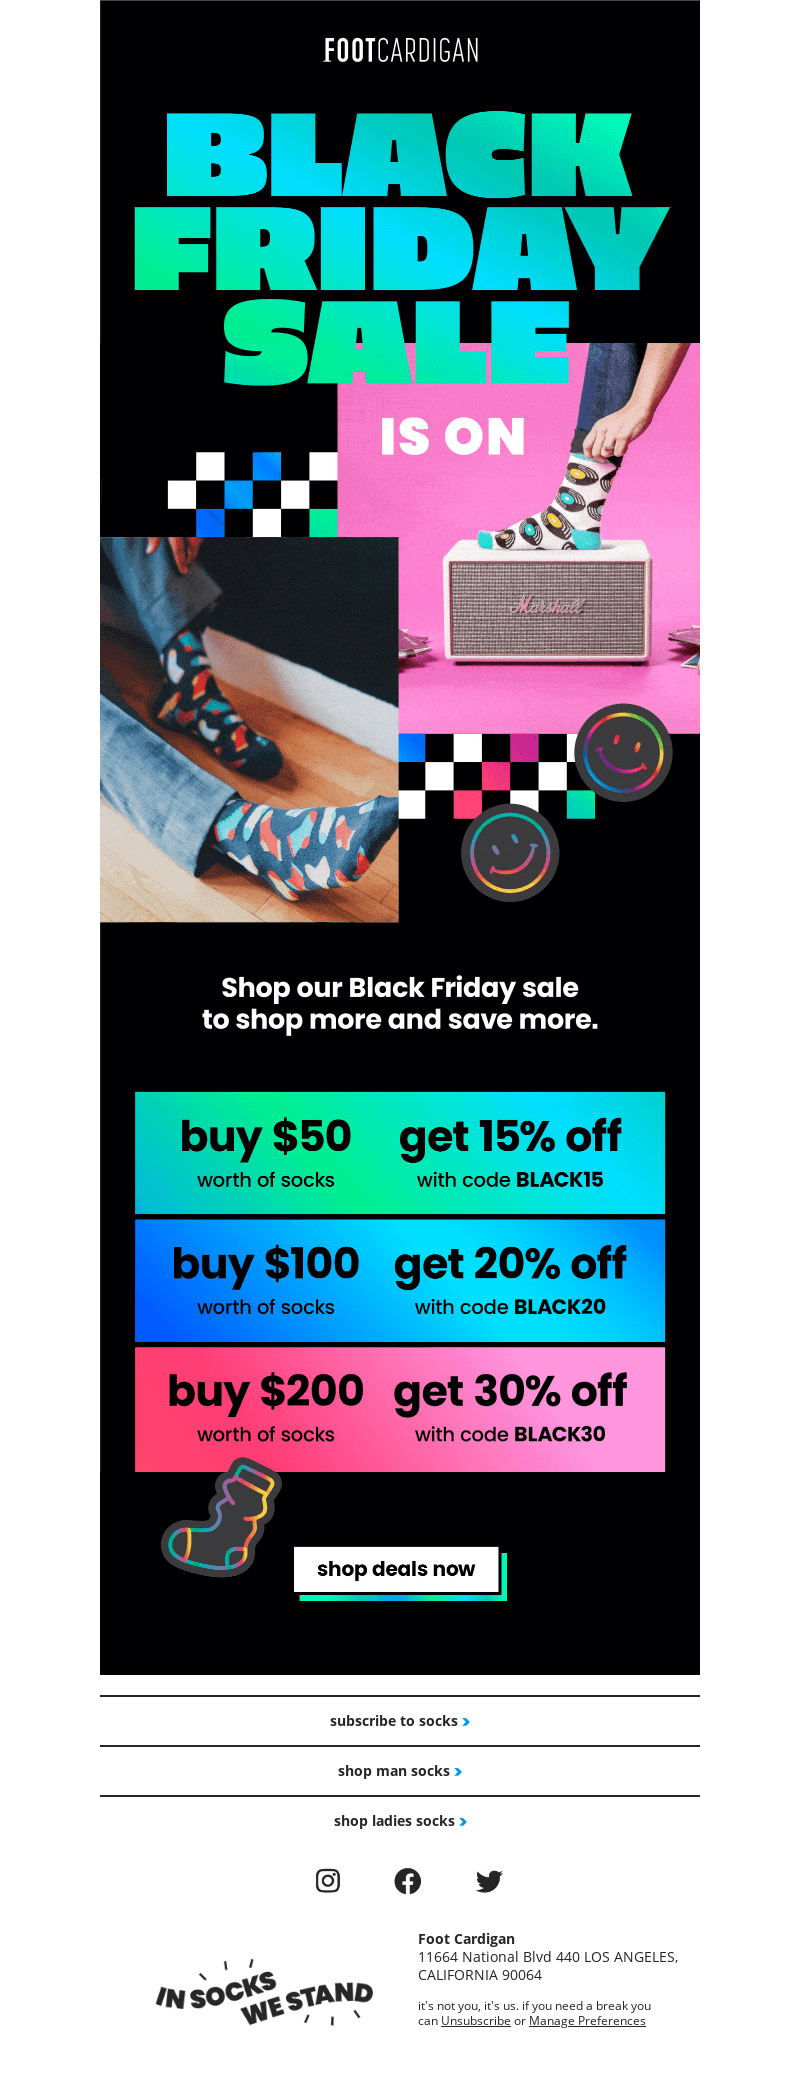 A Black Friday email with bright elements and photos on a black background